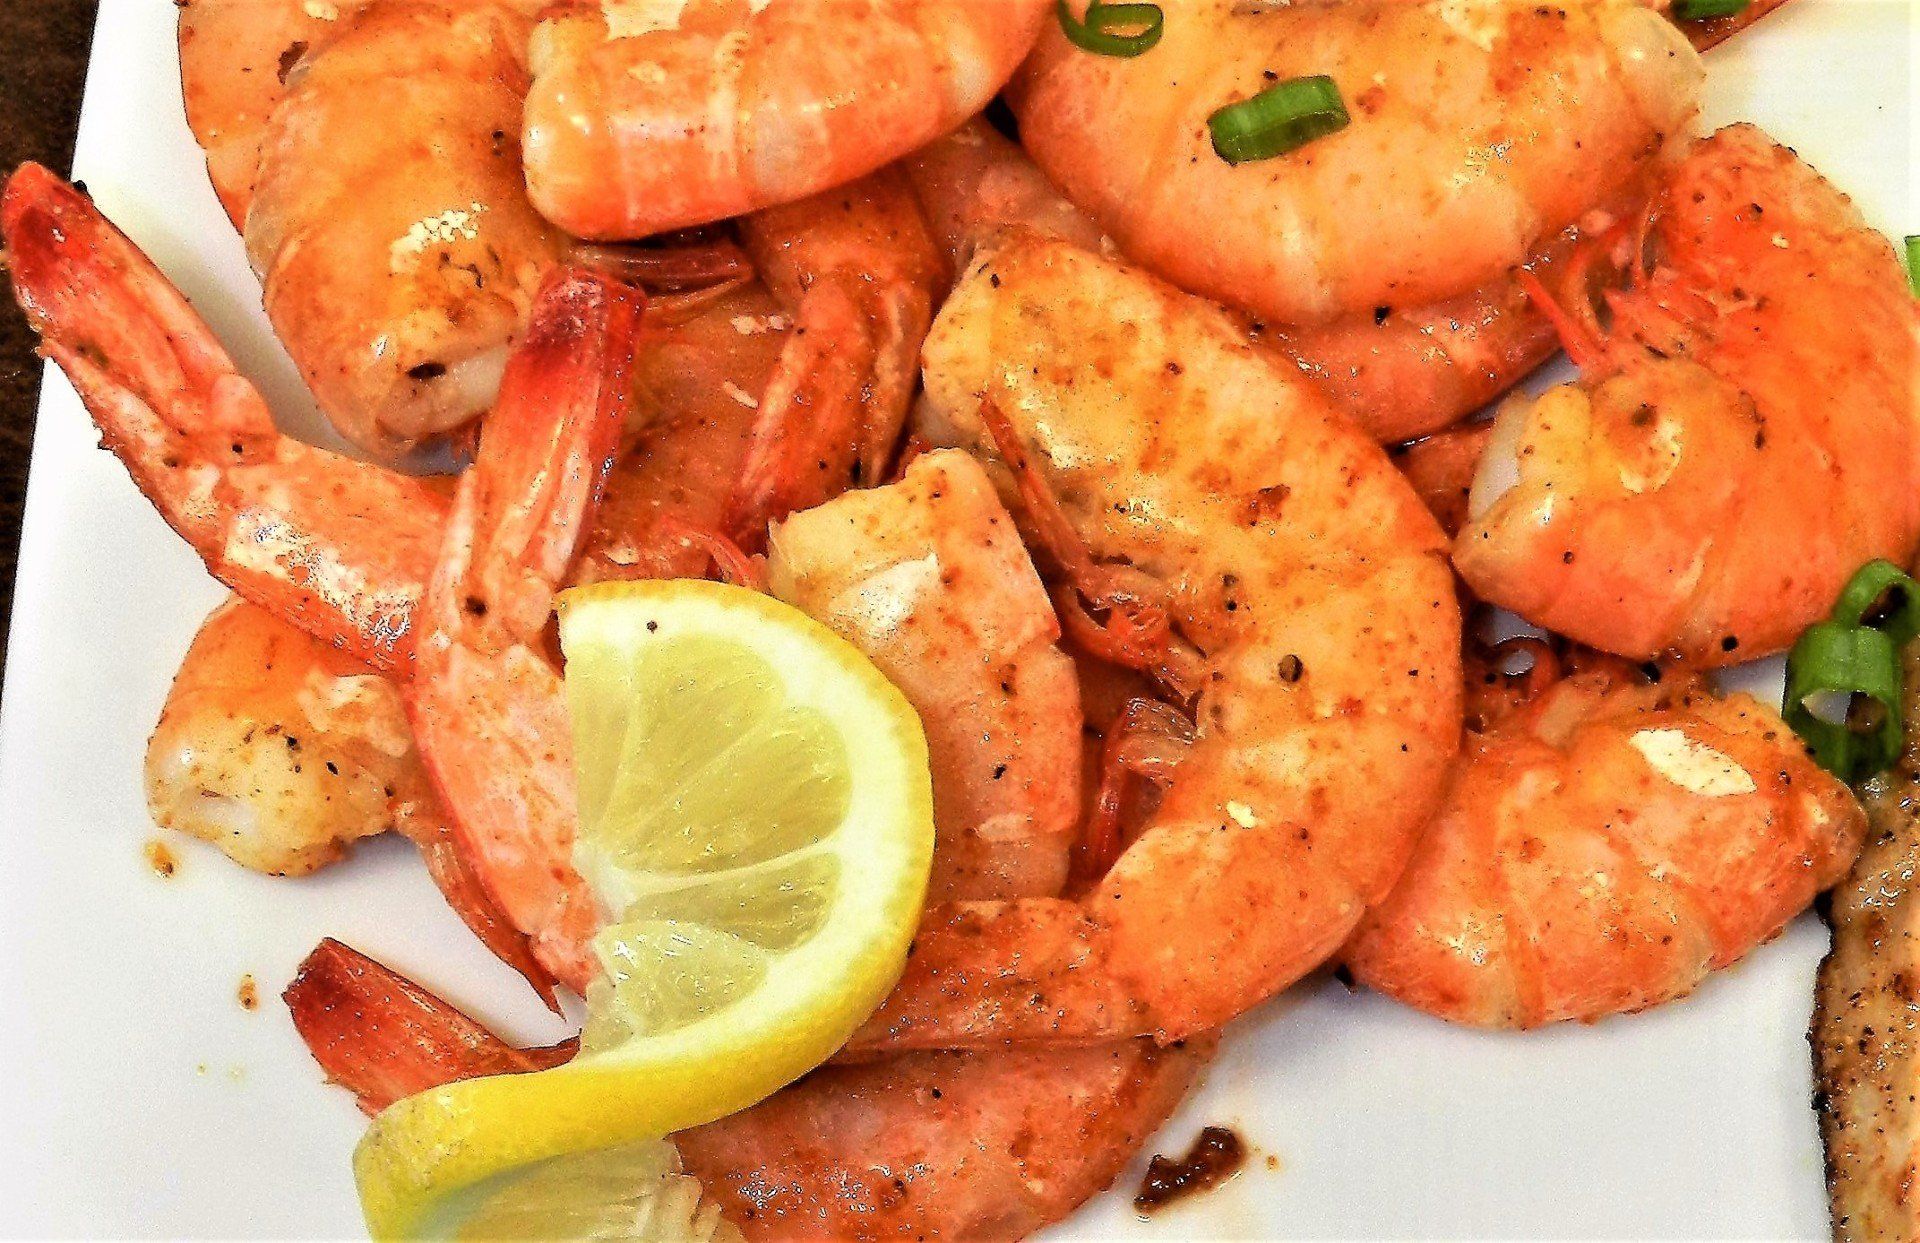 S&S Seafood’s scratch kitchen is serving seafood freshness in Gulf Shores, Alabama.